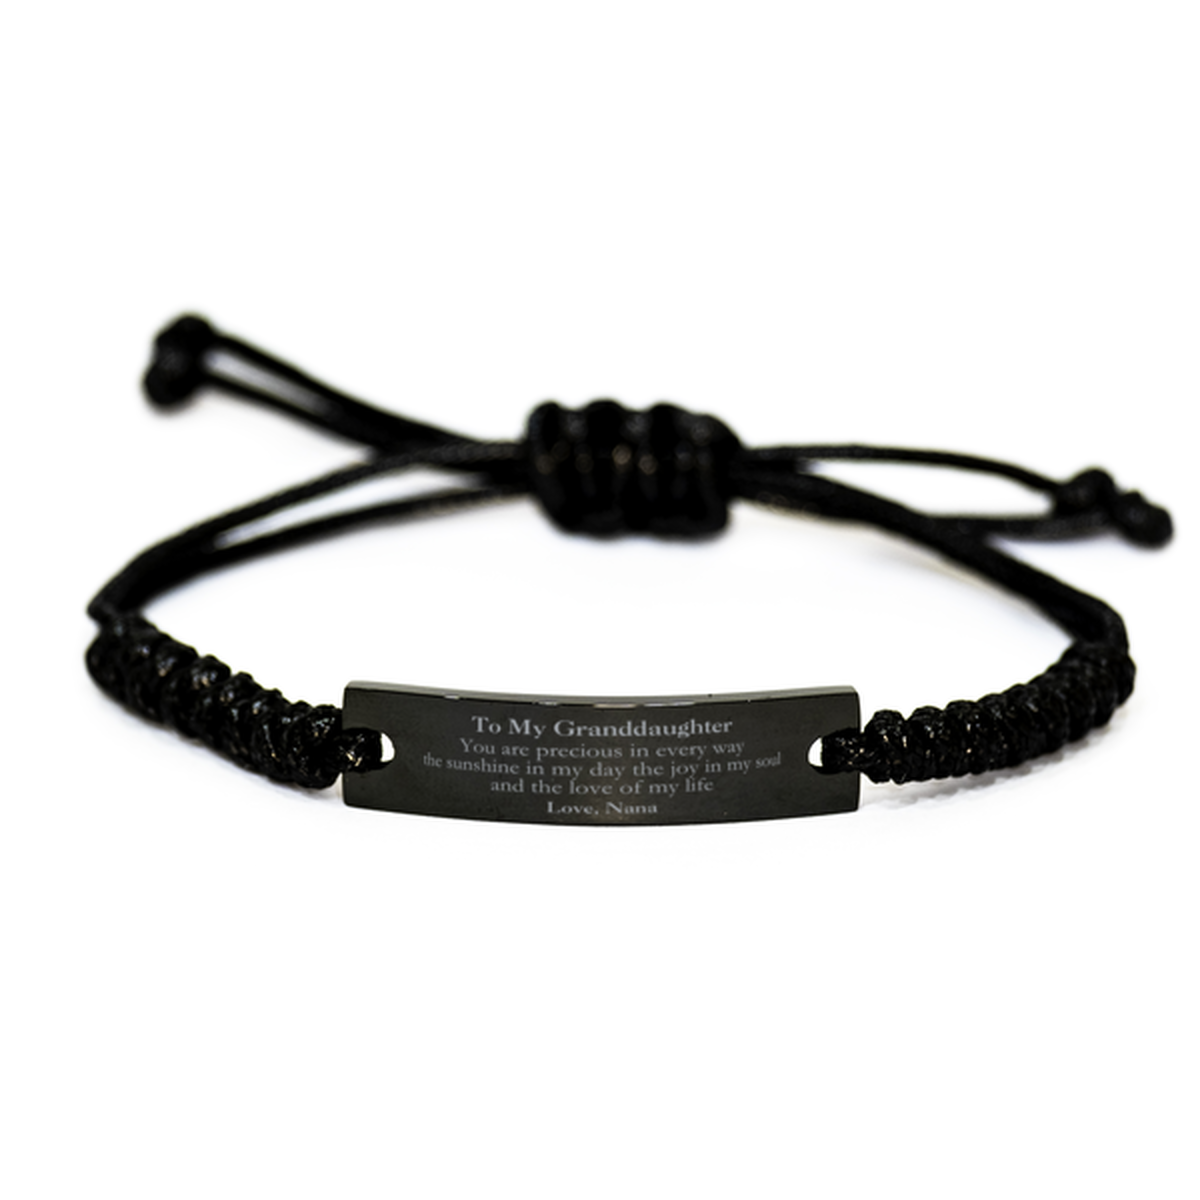 Graduation Gifts for Granddaughter Black Rope Bracelet Present from Nana, Christmas Granddaughter Birthday Gifts Granddaughter You are precious in every way the sunshine in my day. Love, Nana